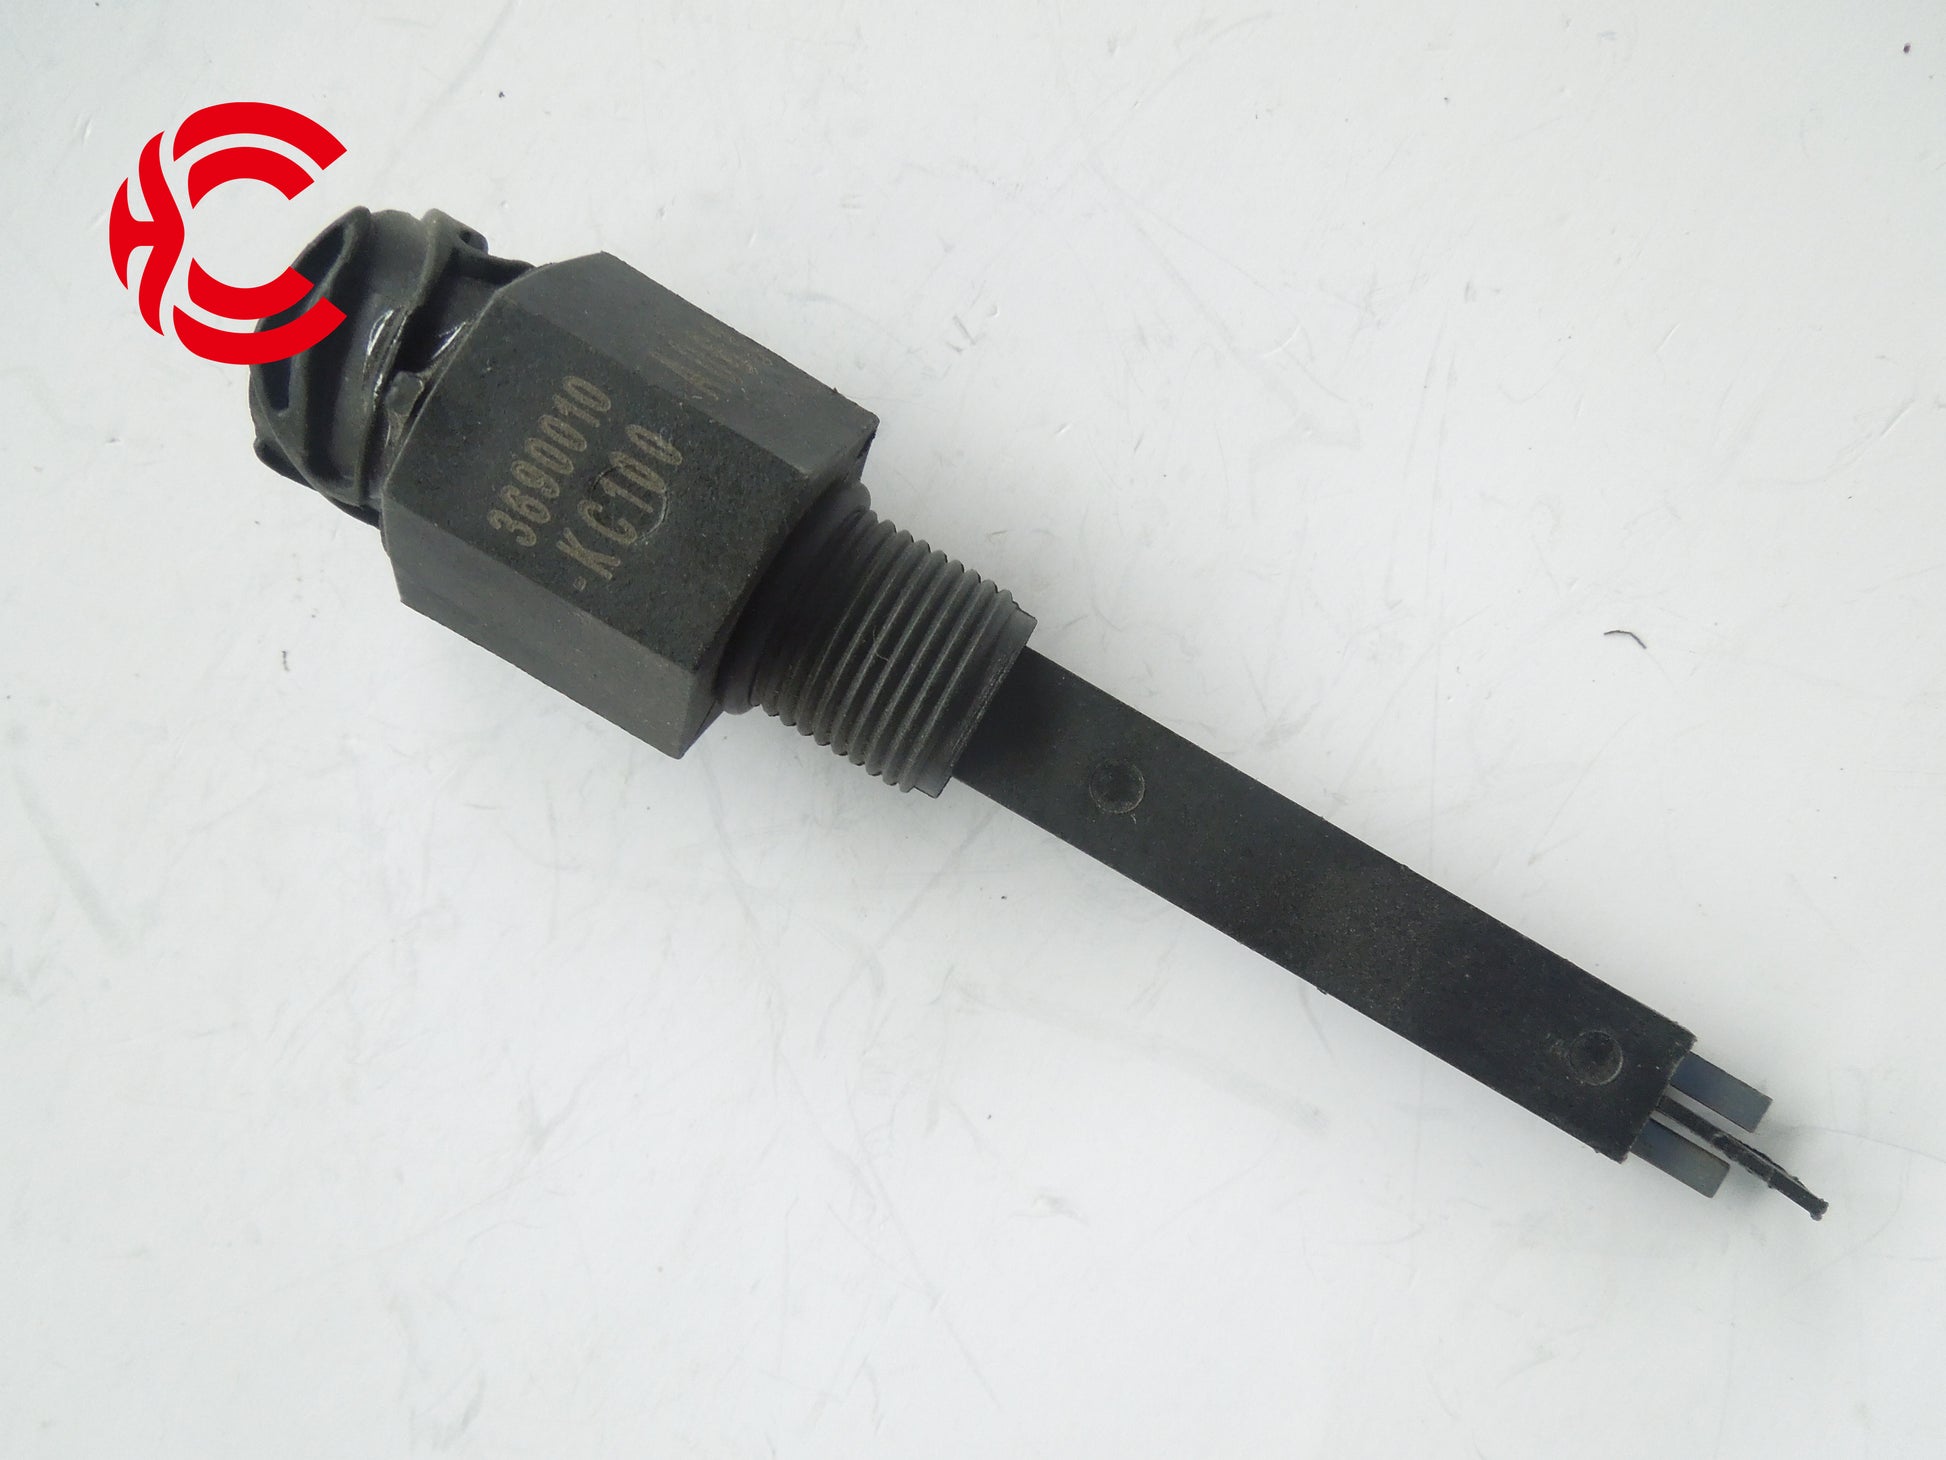 OEM: 3690010-KC100 DONGFENGMaterial: ABS metalColor: Black Origin: Made in ChinaWeight: 50gPacking List: 1* Coolant Level Alarm Sensor More ServiceWe can provide OEM Manufacturing serviceWe can Be your one-step solution for Auto PartsWe can provide technical scheme for you Feel Free to Contact Us, We will get back to you as soon as possible.